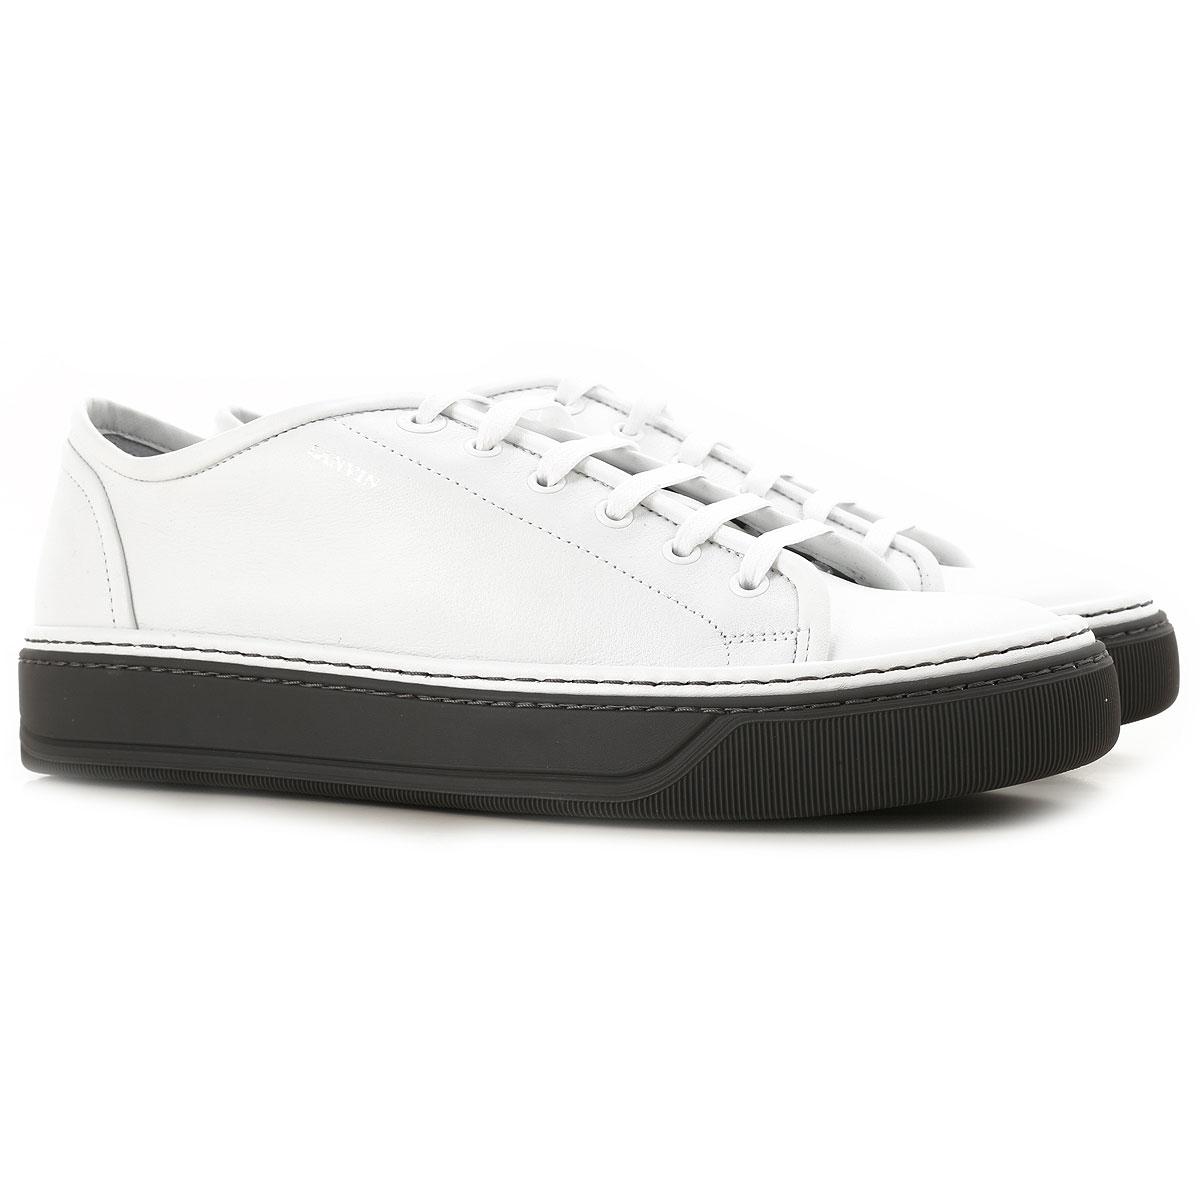 Lanvin Sneakers For Men On Sale In Outlet in White for Men - Save 39% ...